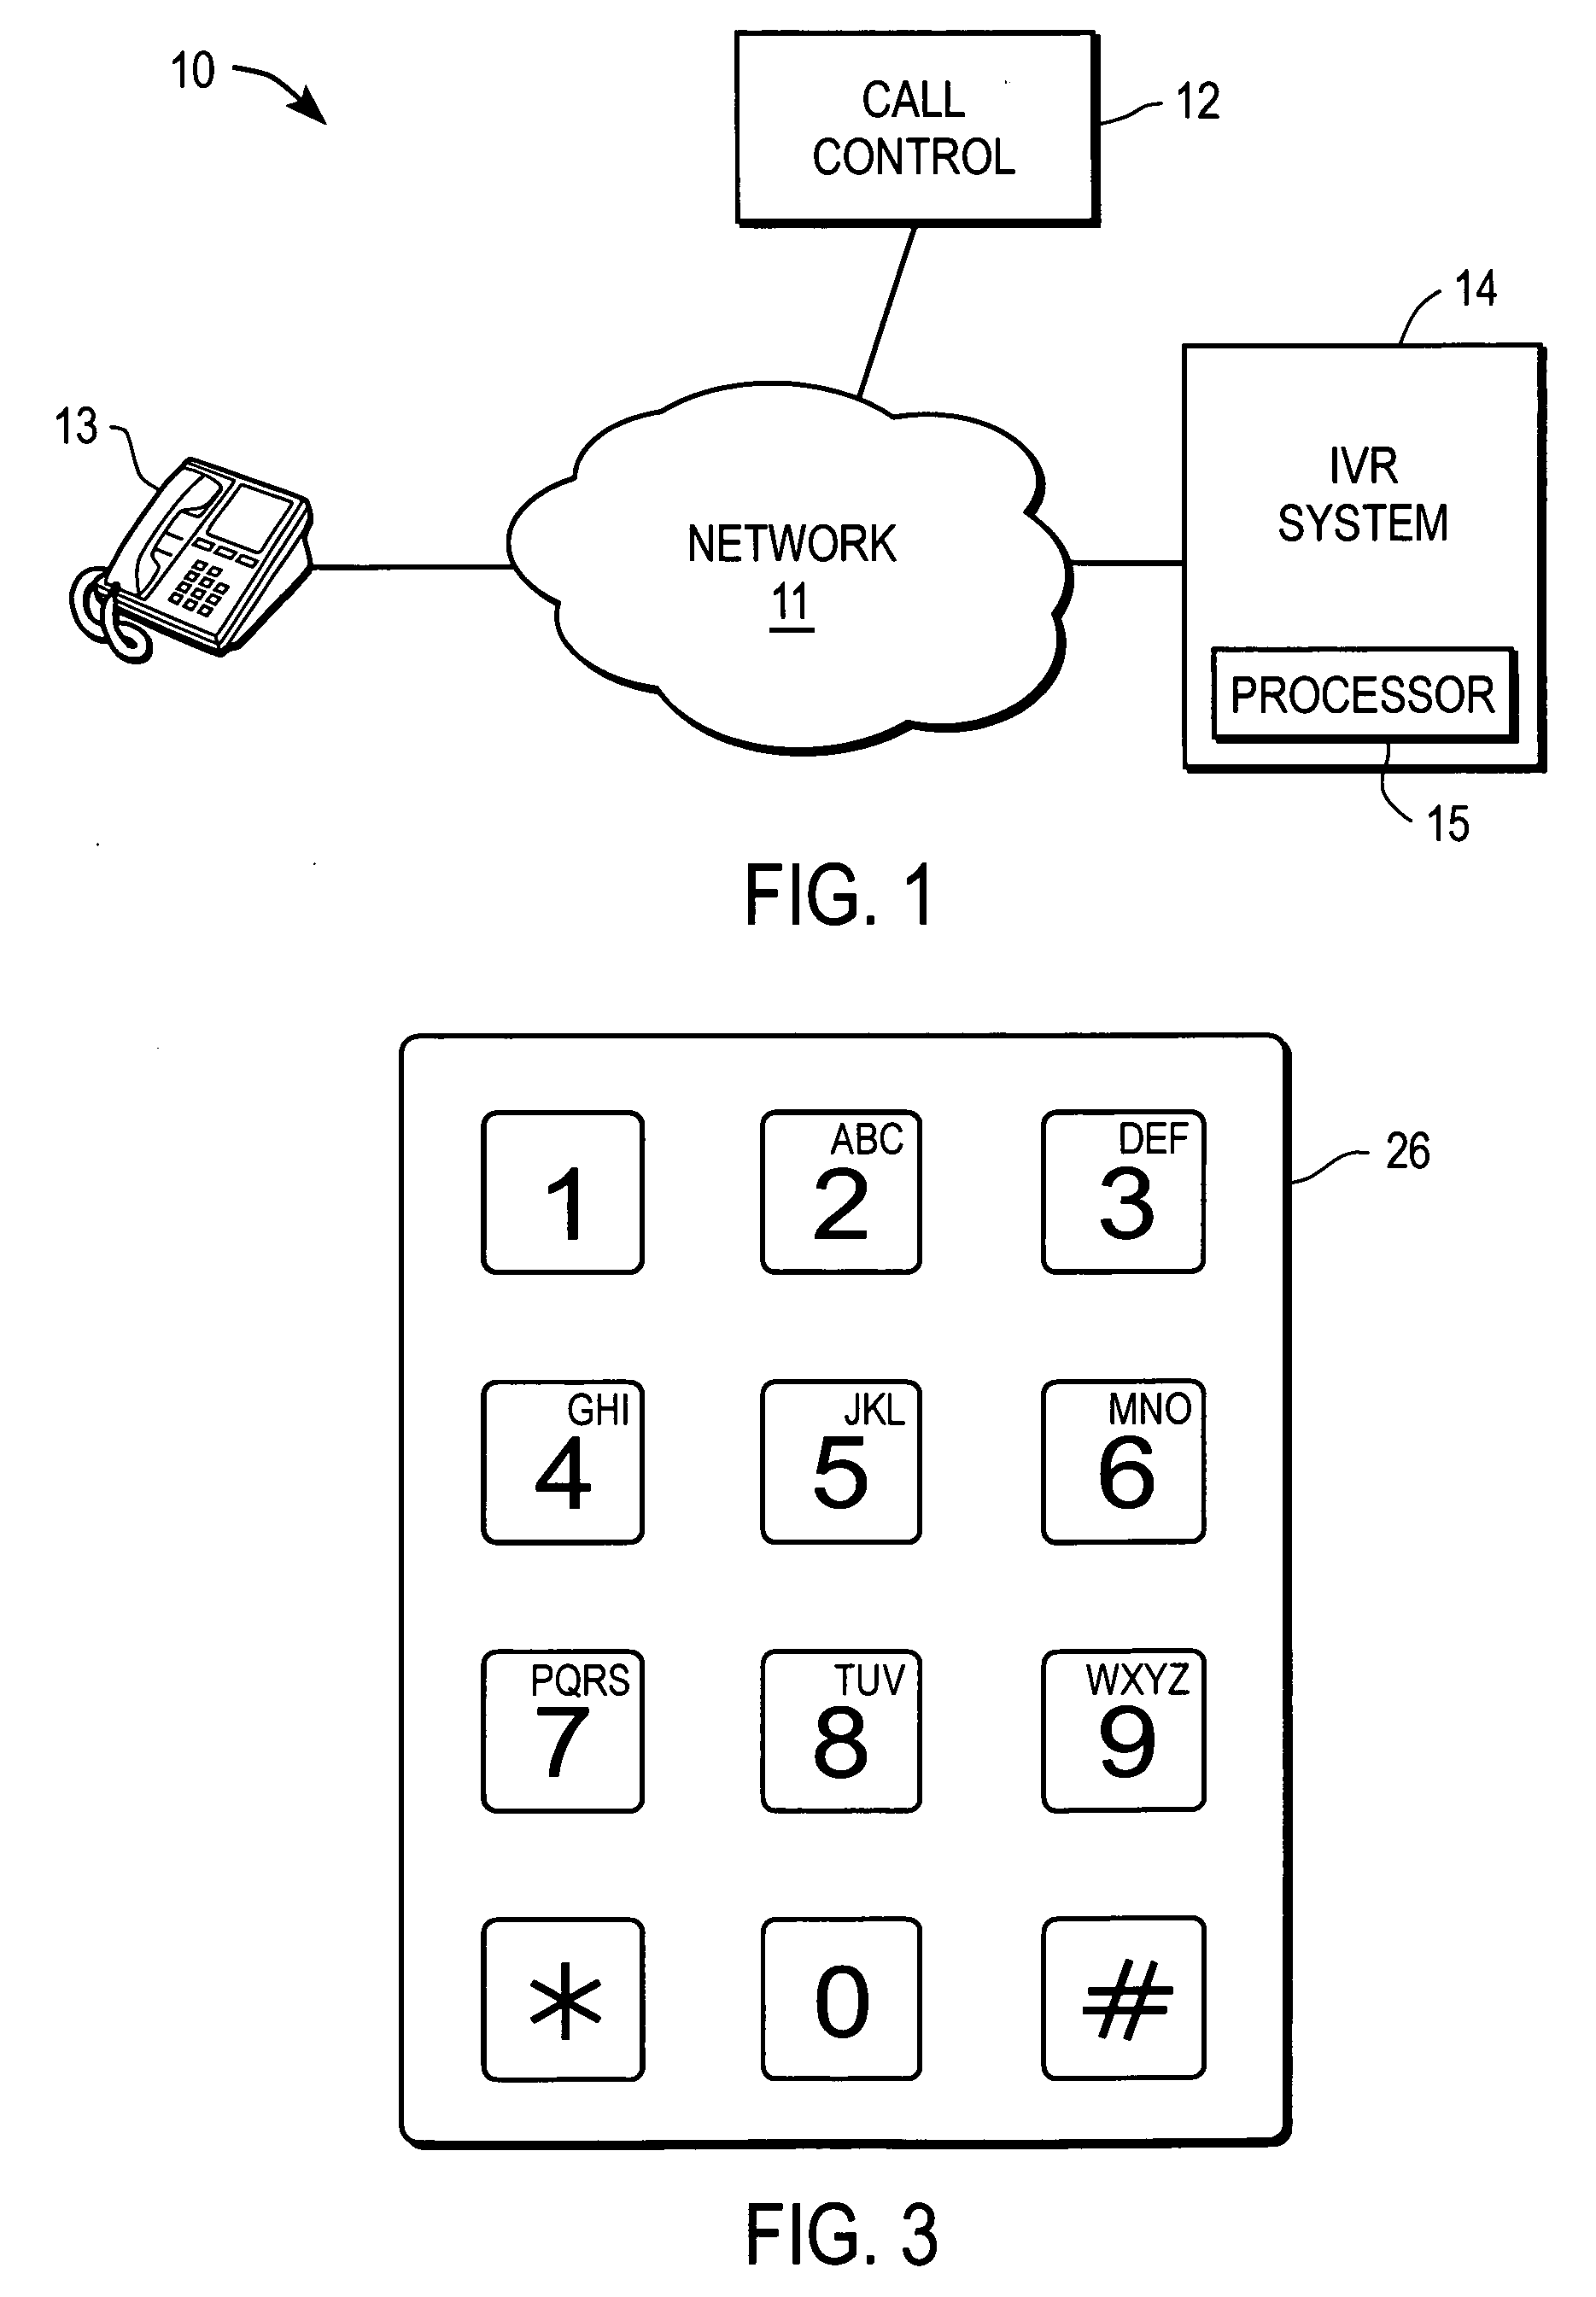 Randomized digit prompting for an interactive voice response system